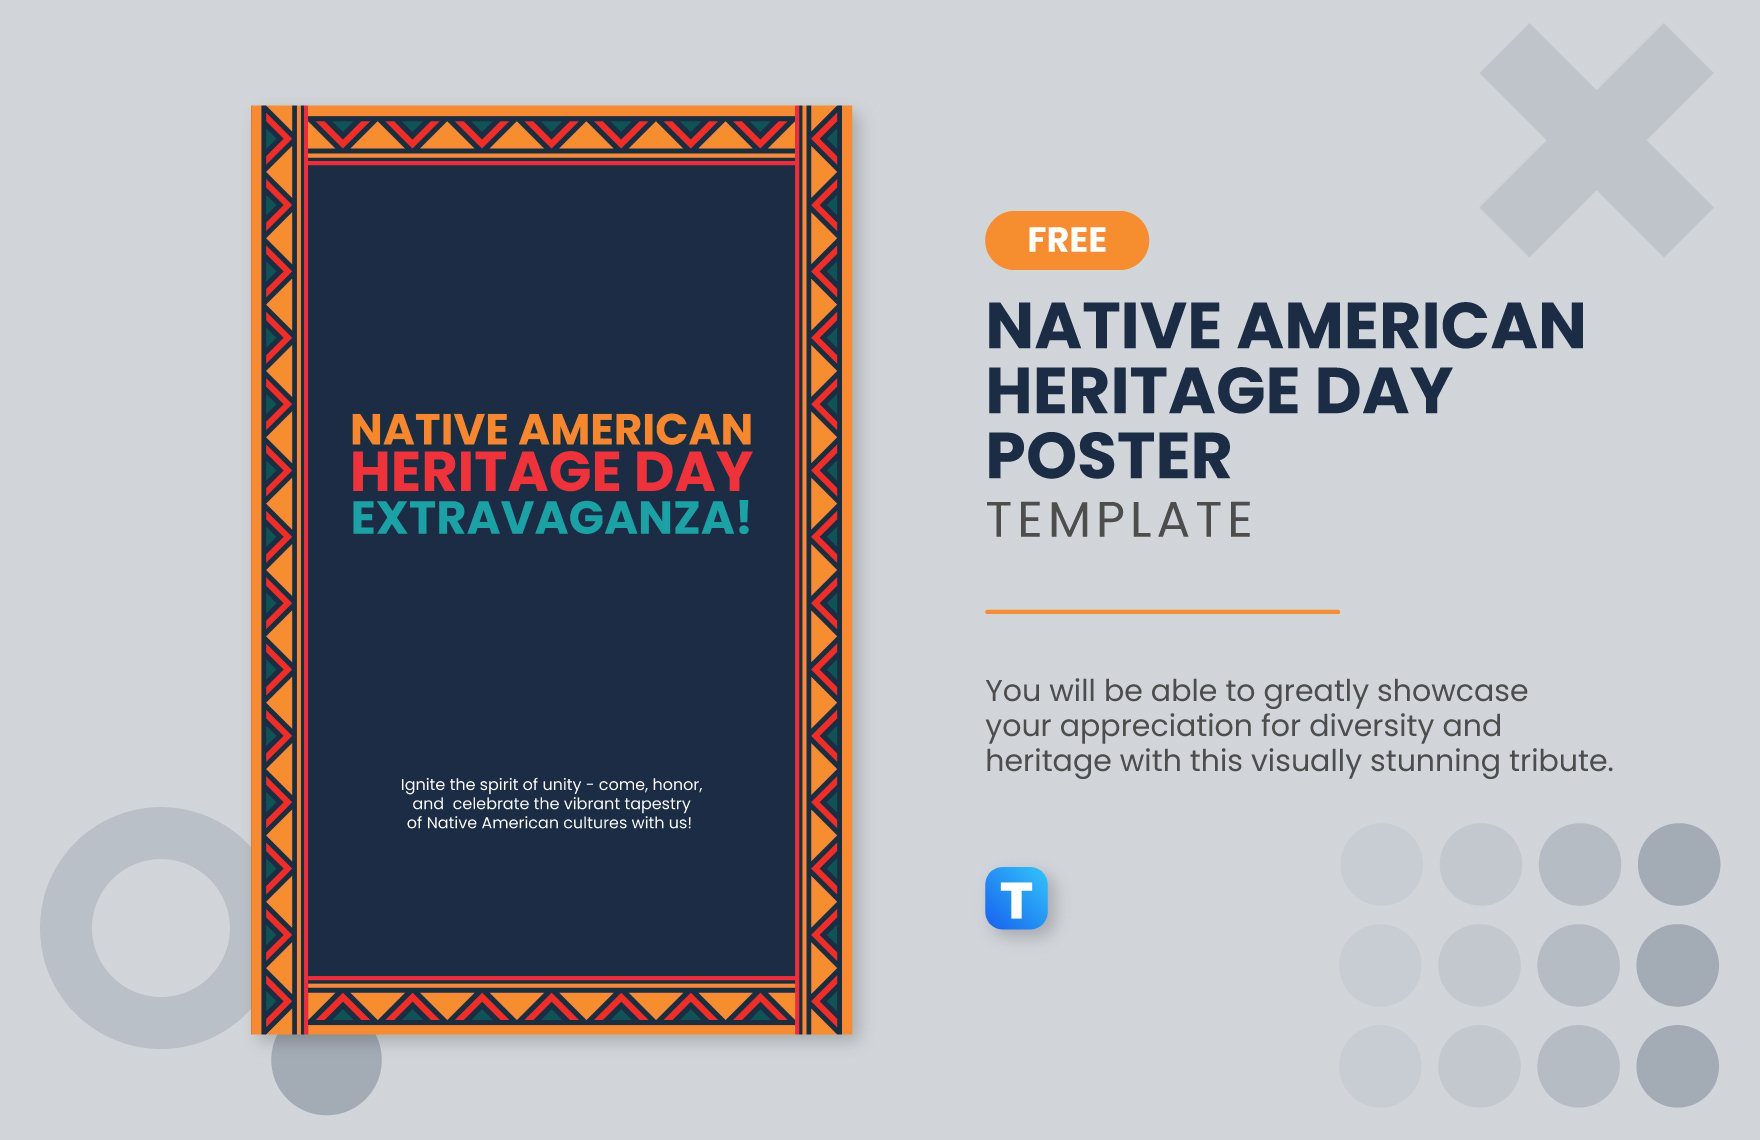 Free Native American Heritage Day Poster Template